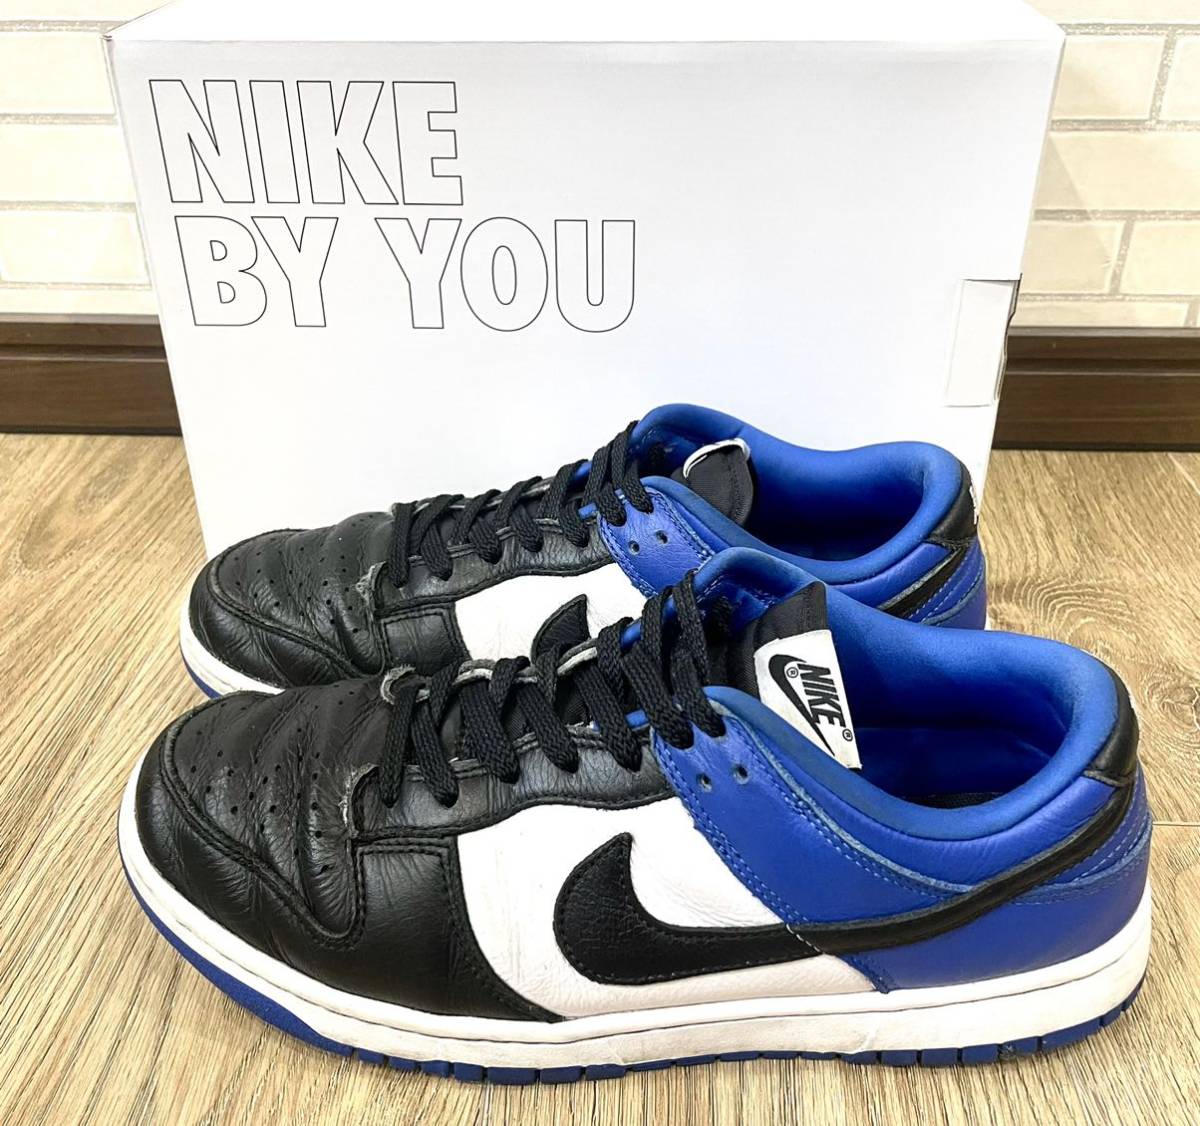 27cm NIKE DUNK LOW Fragment Design オマージュ 360 BY YOUダンク_画像1